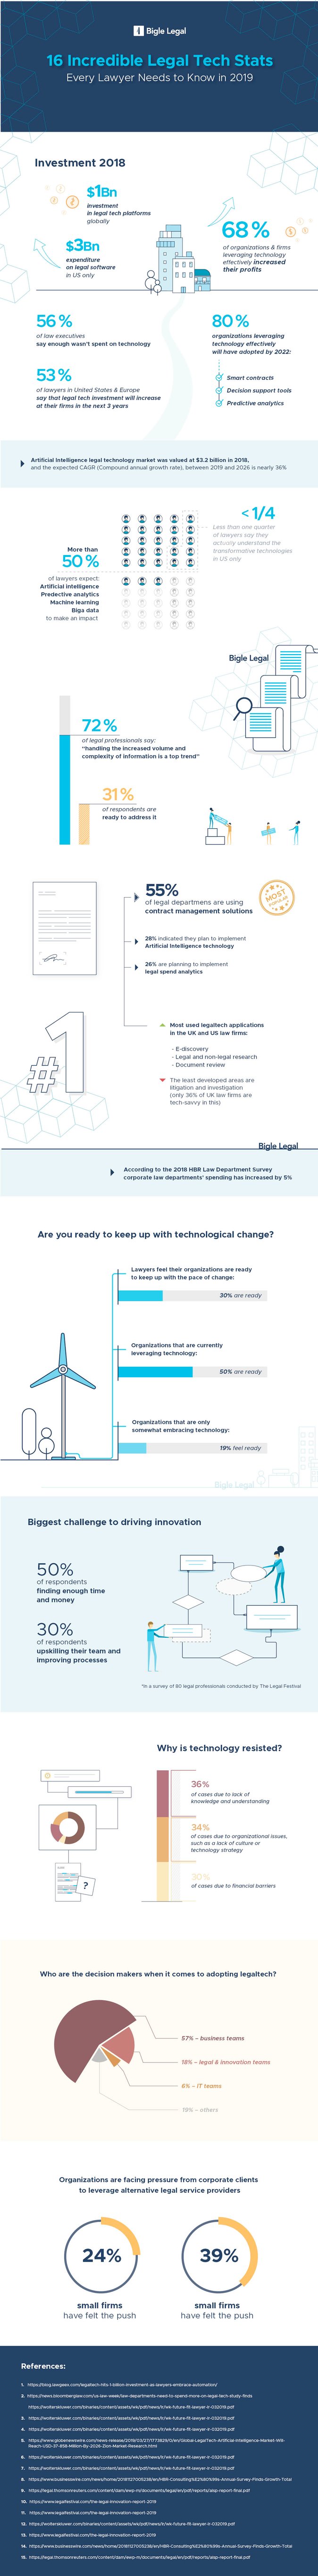 Incredible LegalTech Stats in 2019 infographic